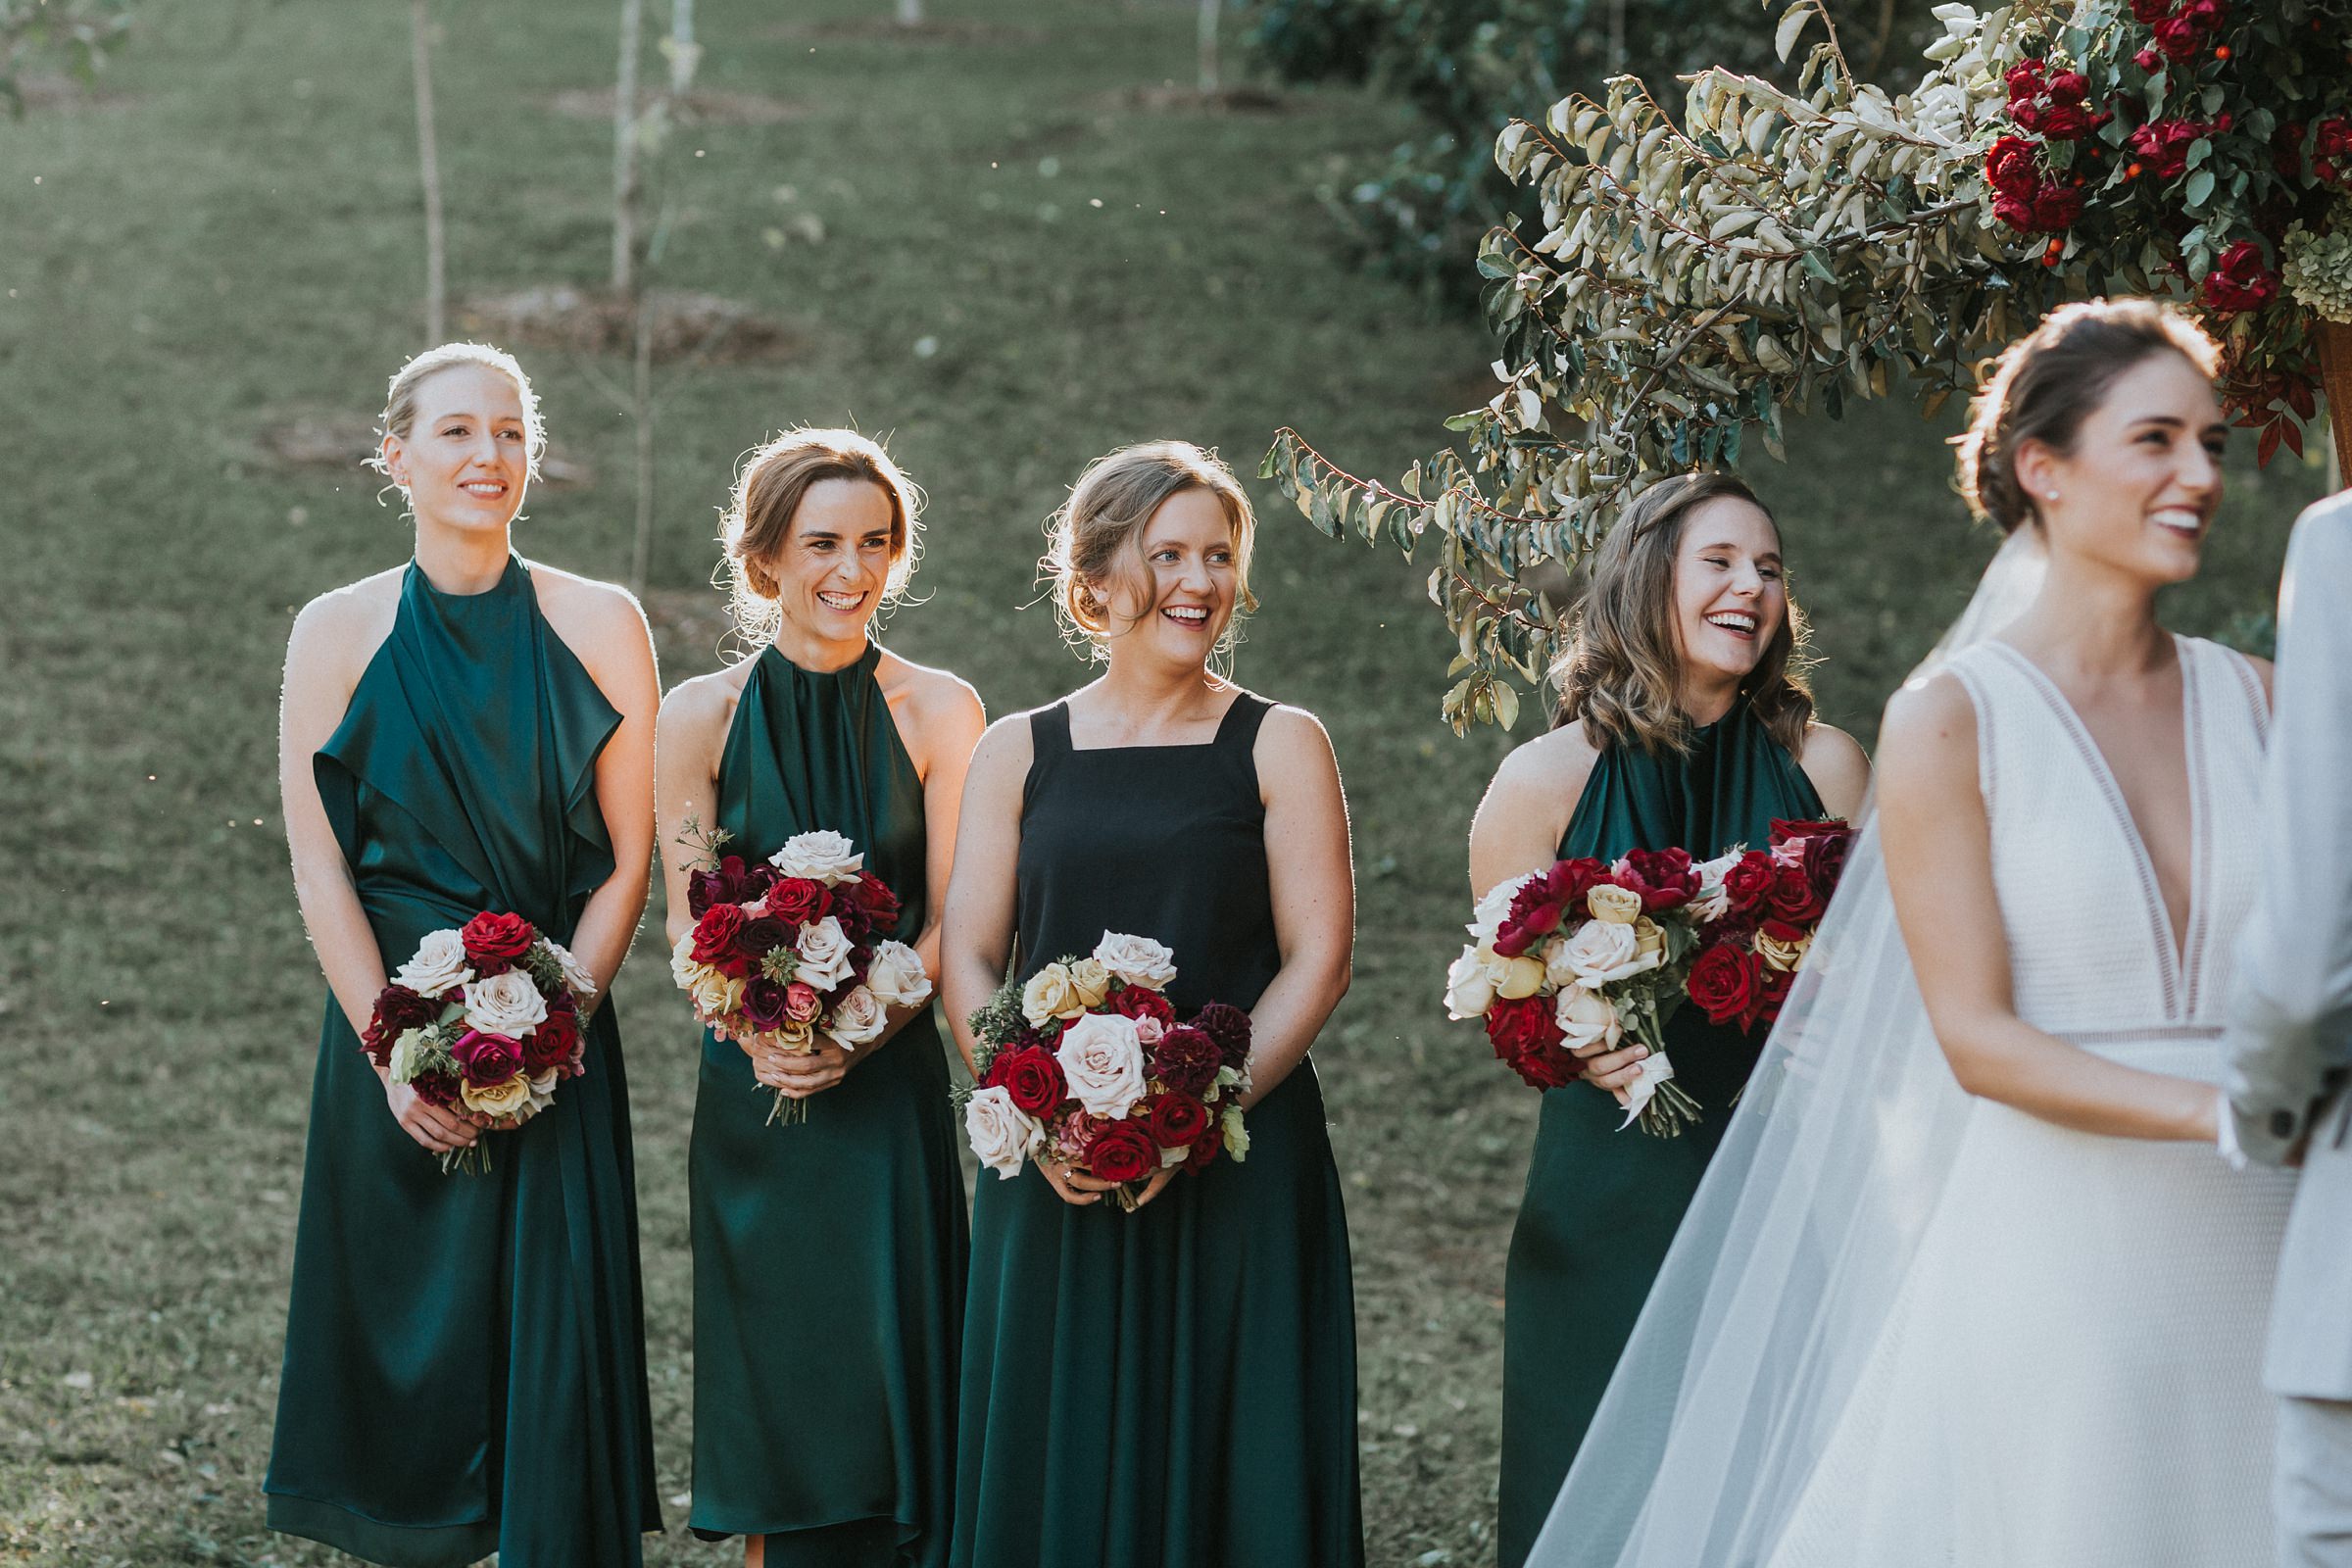 bridesmaids smiling and excited for wedding ceremony